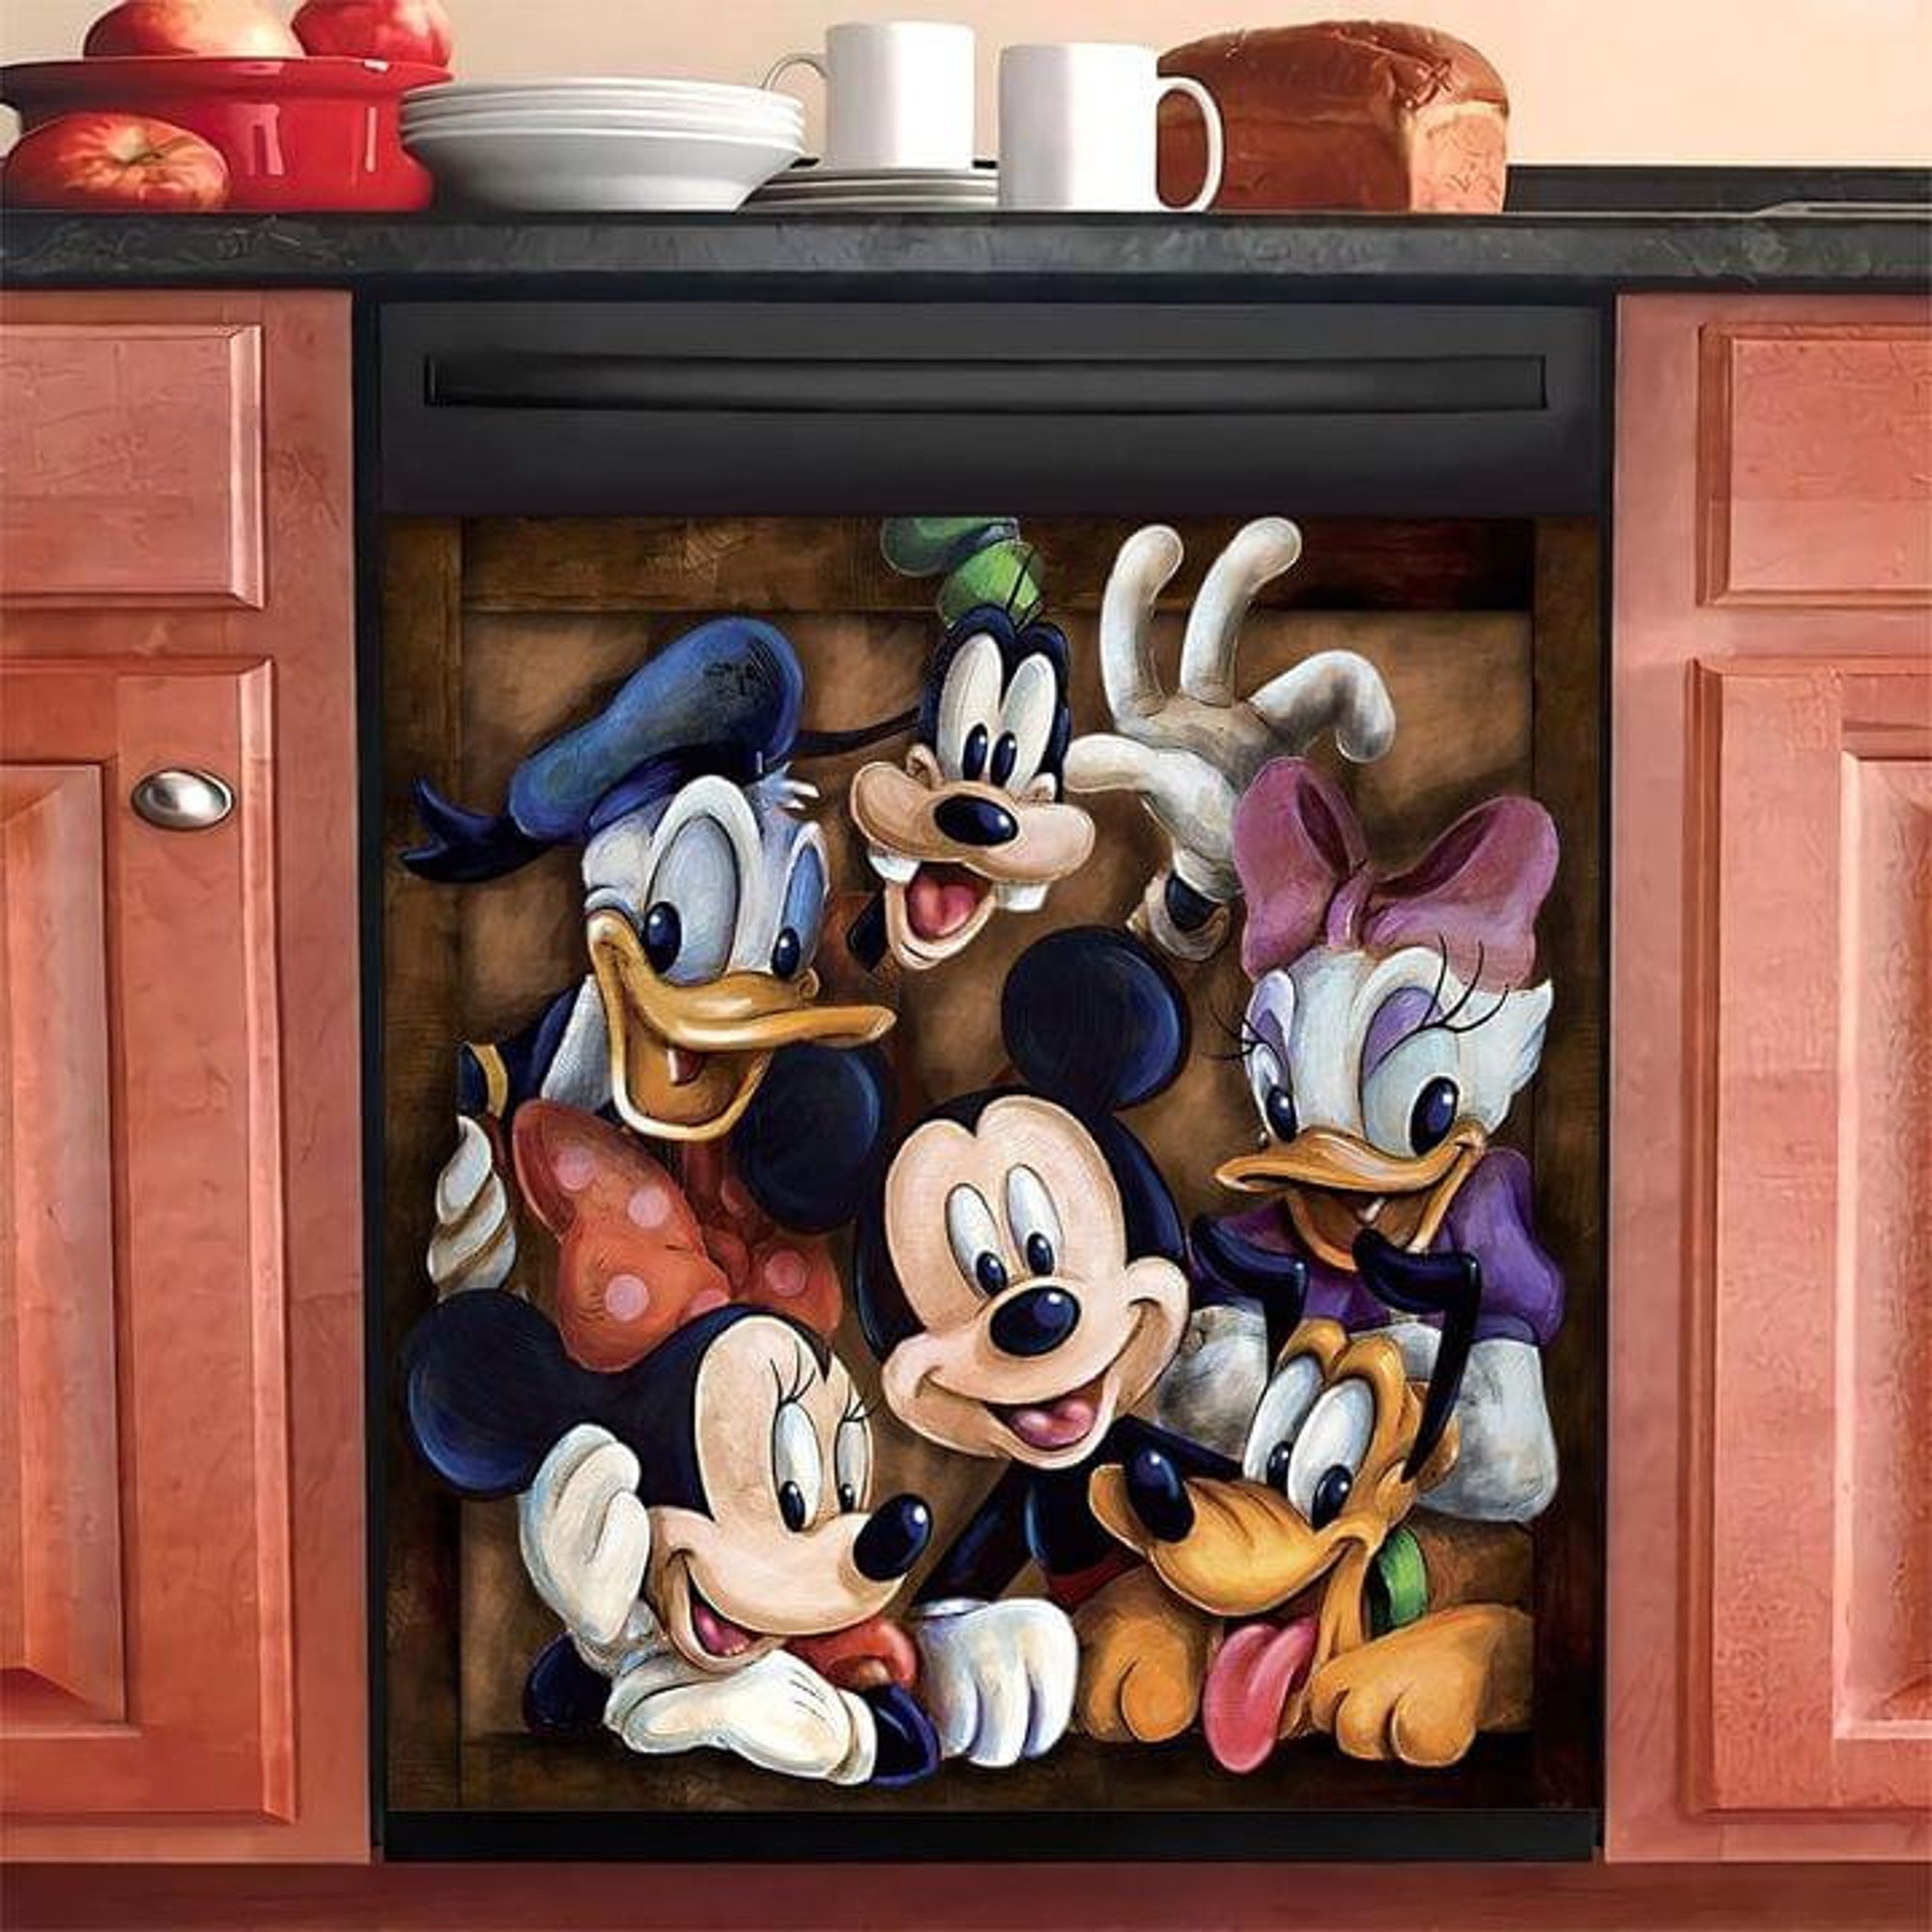 Mickey Minni Plut0 D0nald Duck Merry Christmas Xmas Gift Dishwasher Cover